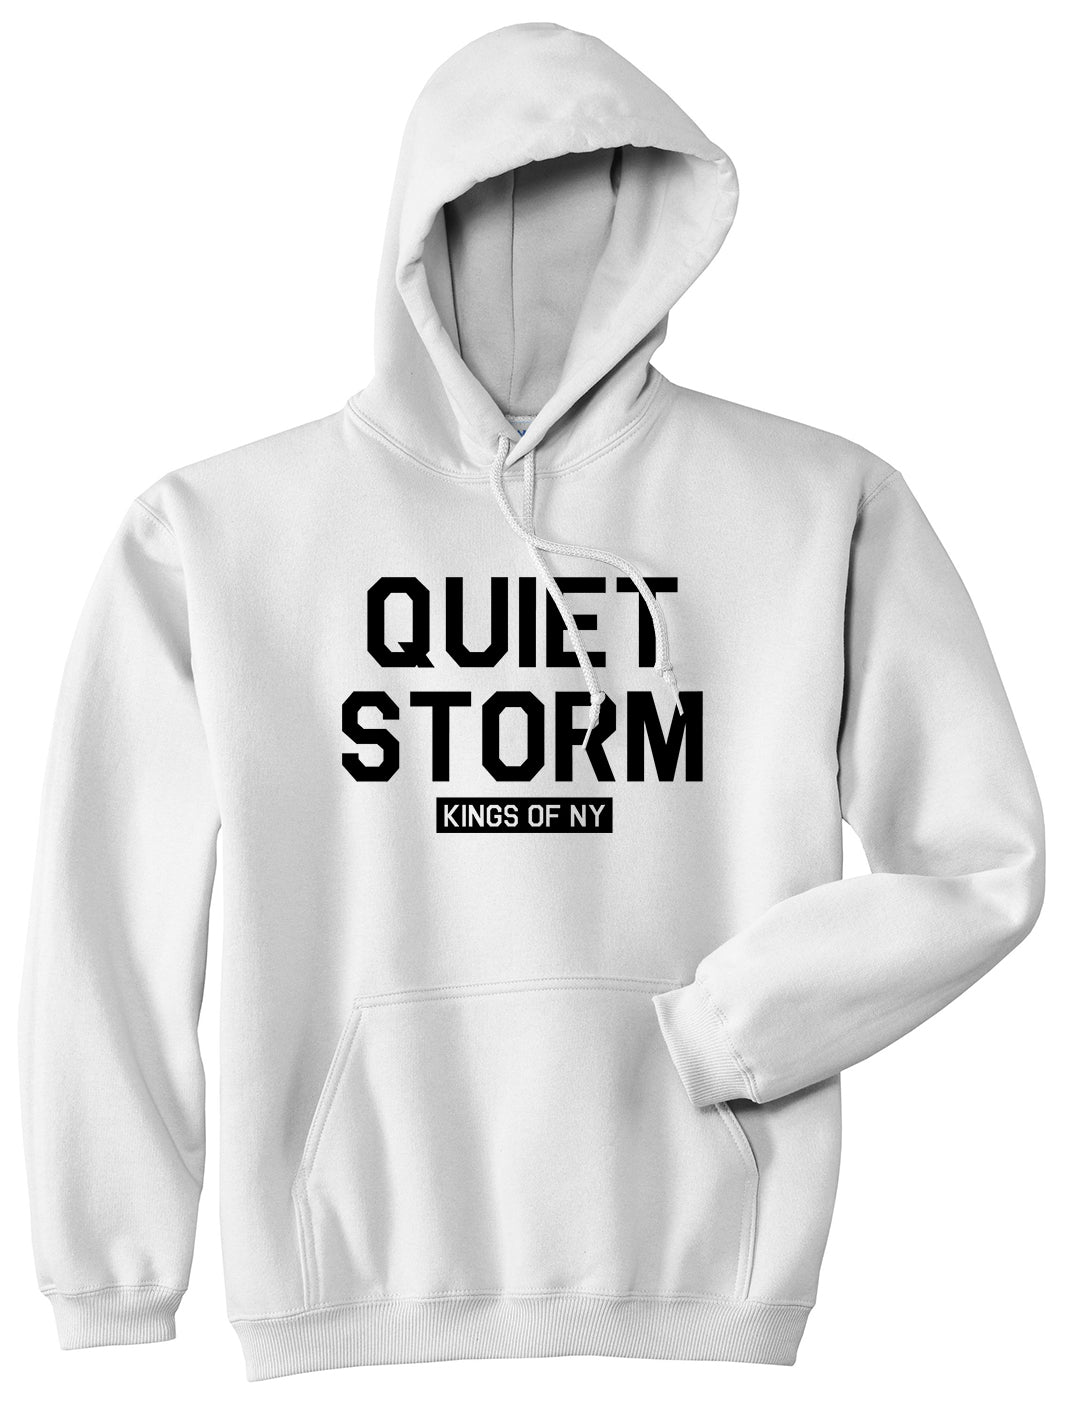 Quiet Storm Kings Of NY Mens Pullover Hoodie White